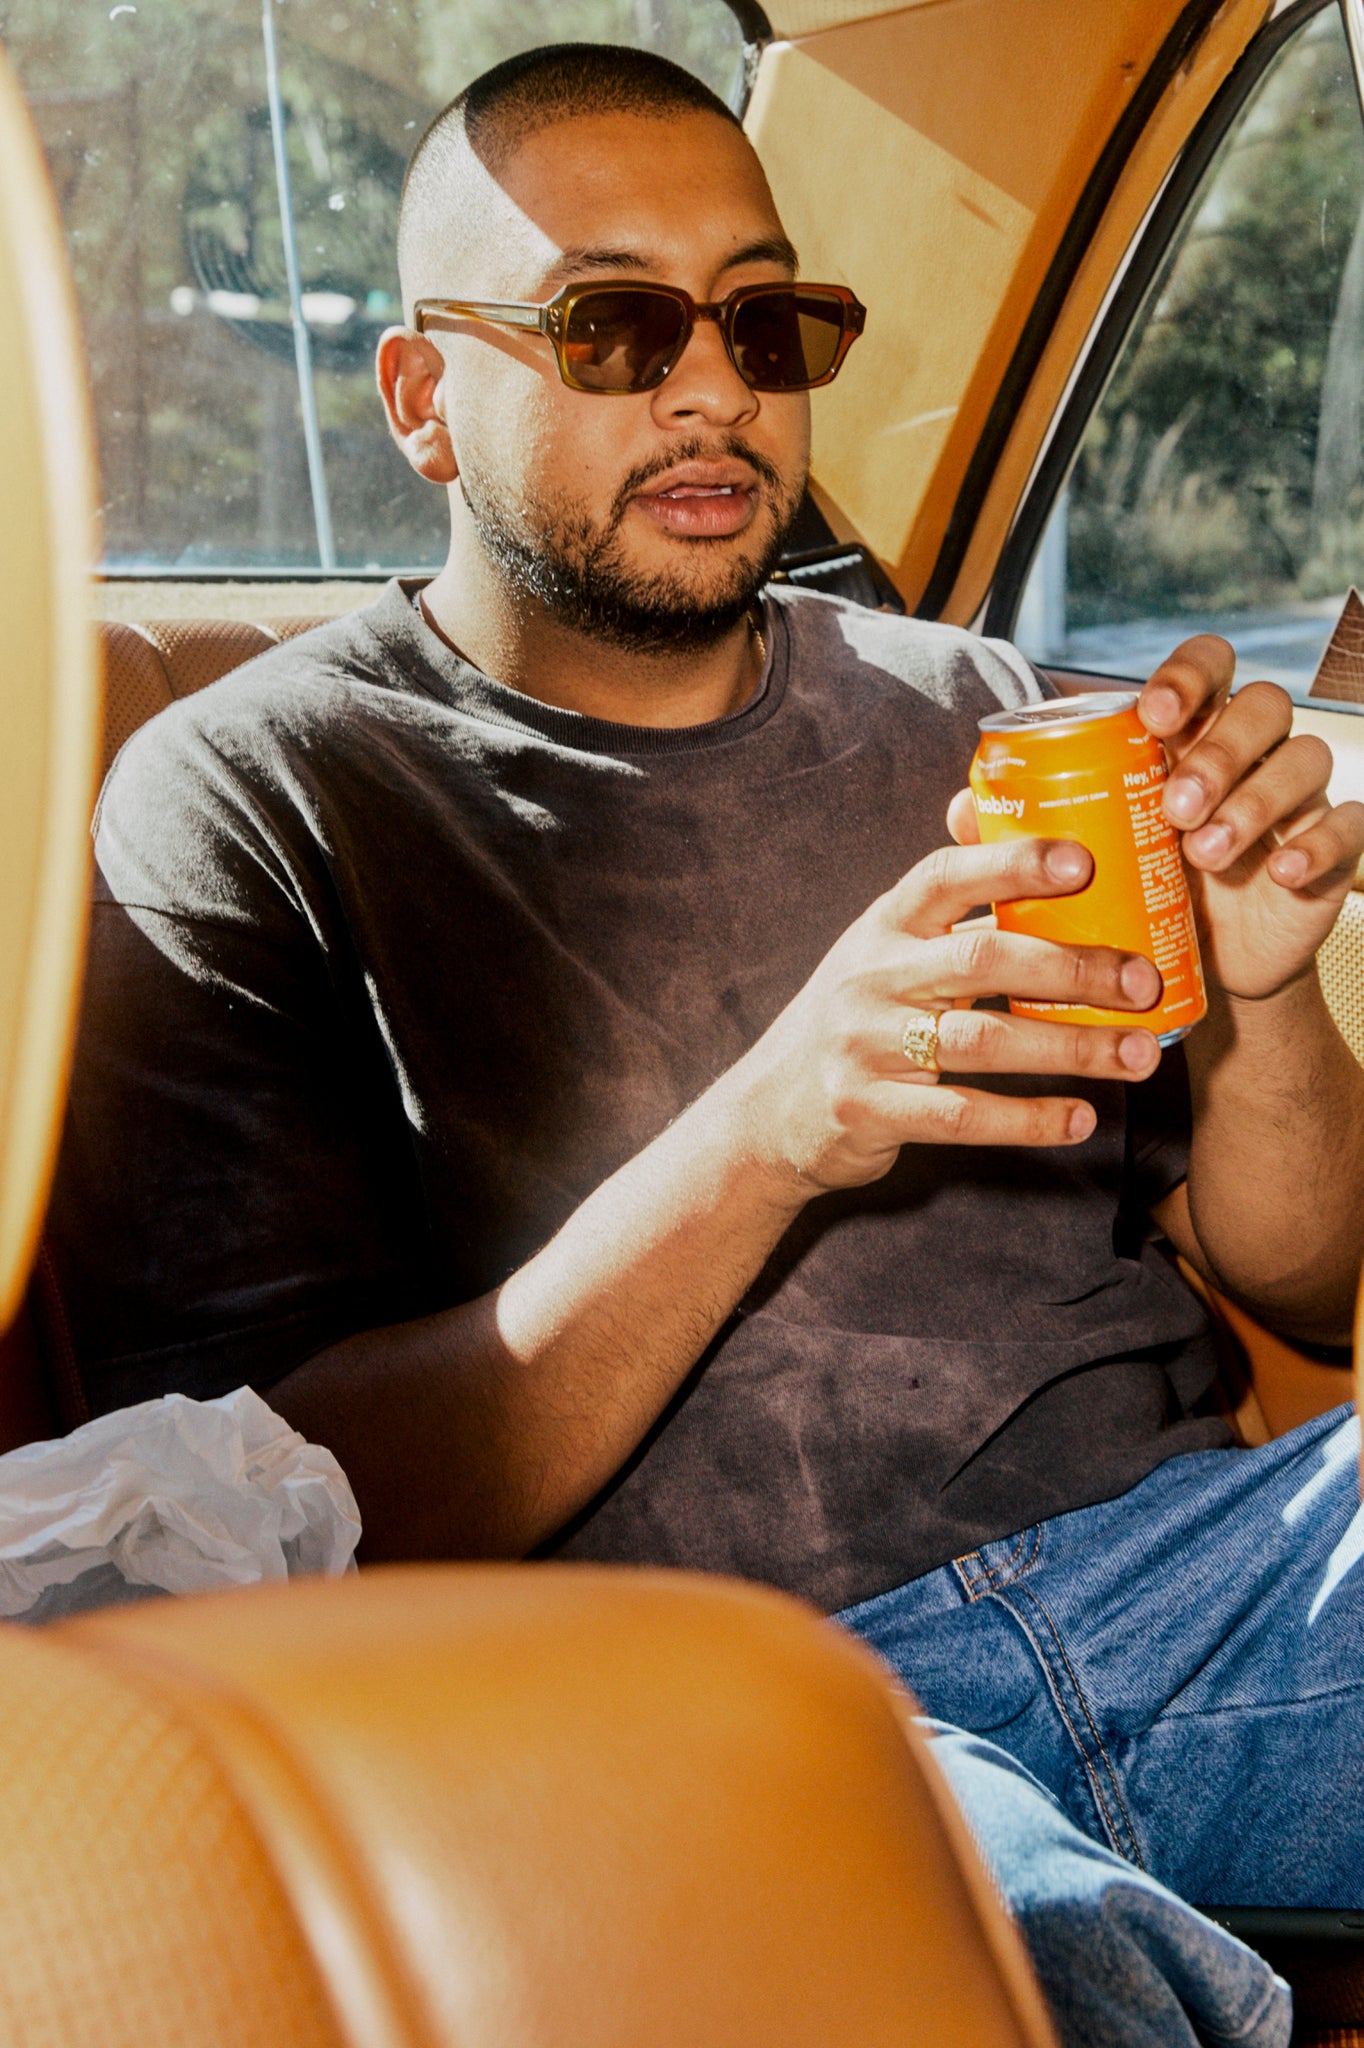 Summer beach drives with a refreshing orange fanta soda to cool down in the Australian summer